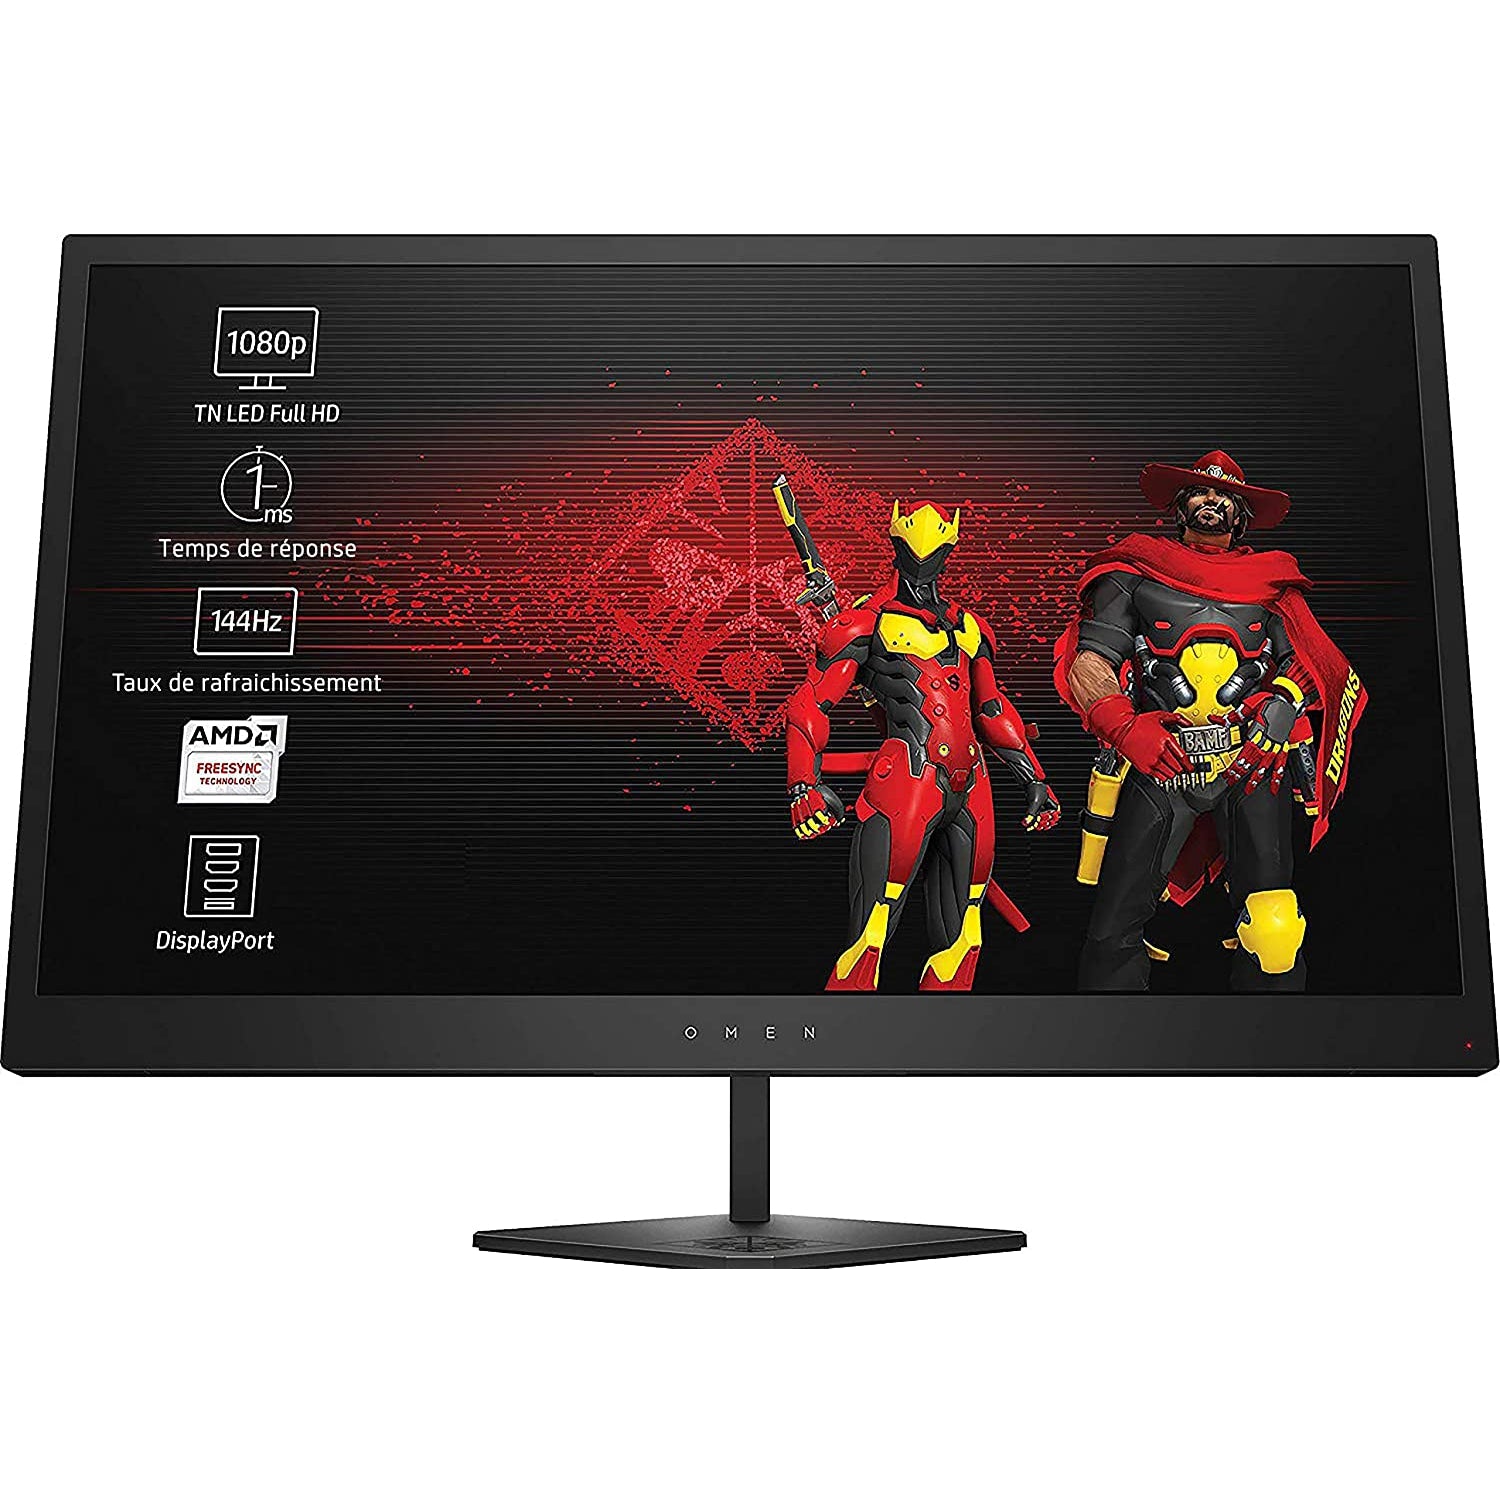 HP Omen LED Monitor 25 inches FHD 1080p HDMI